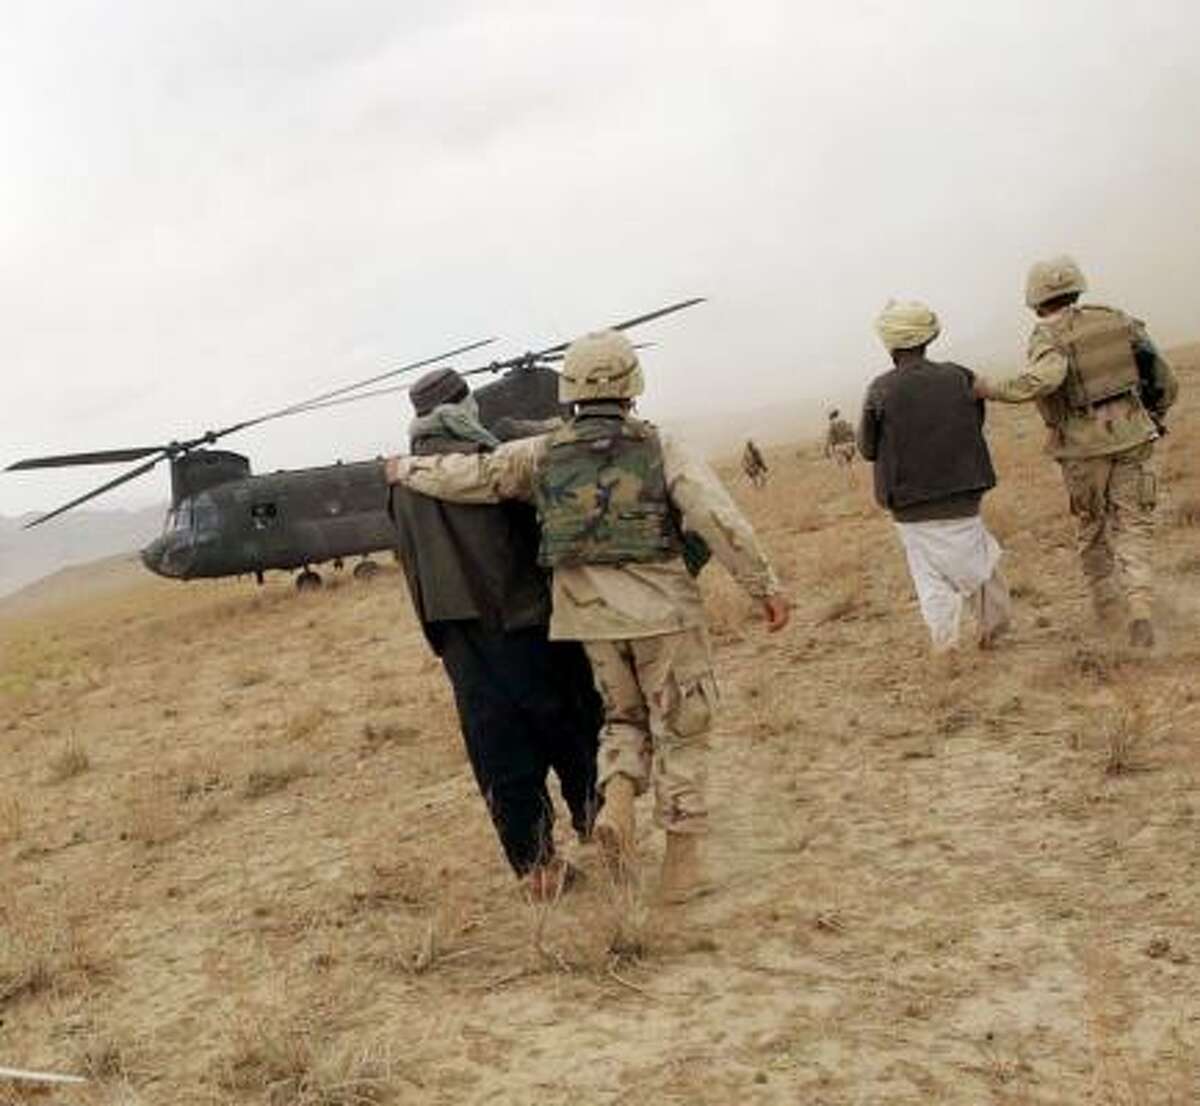 Afghan detainees are led to a helicopter by U.S. forces in Taxi to the Dark Side.